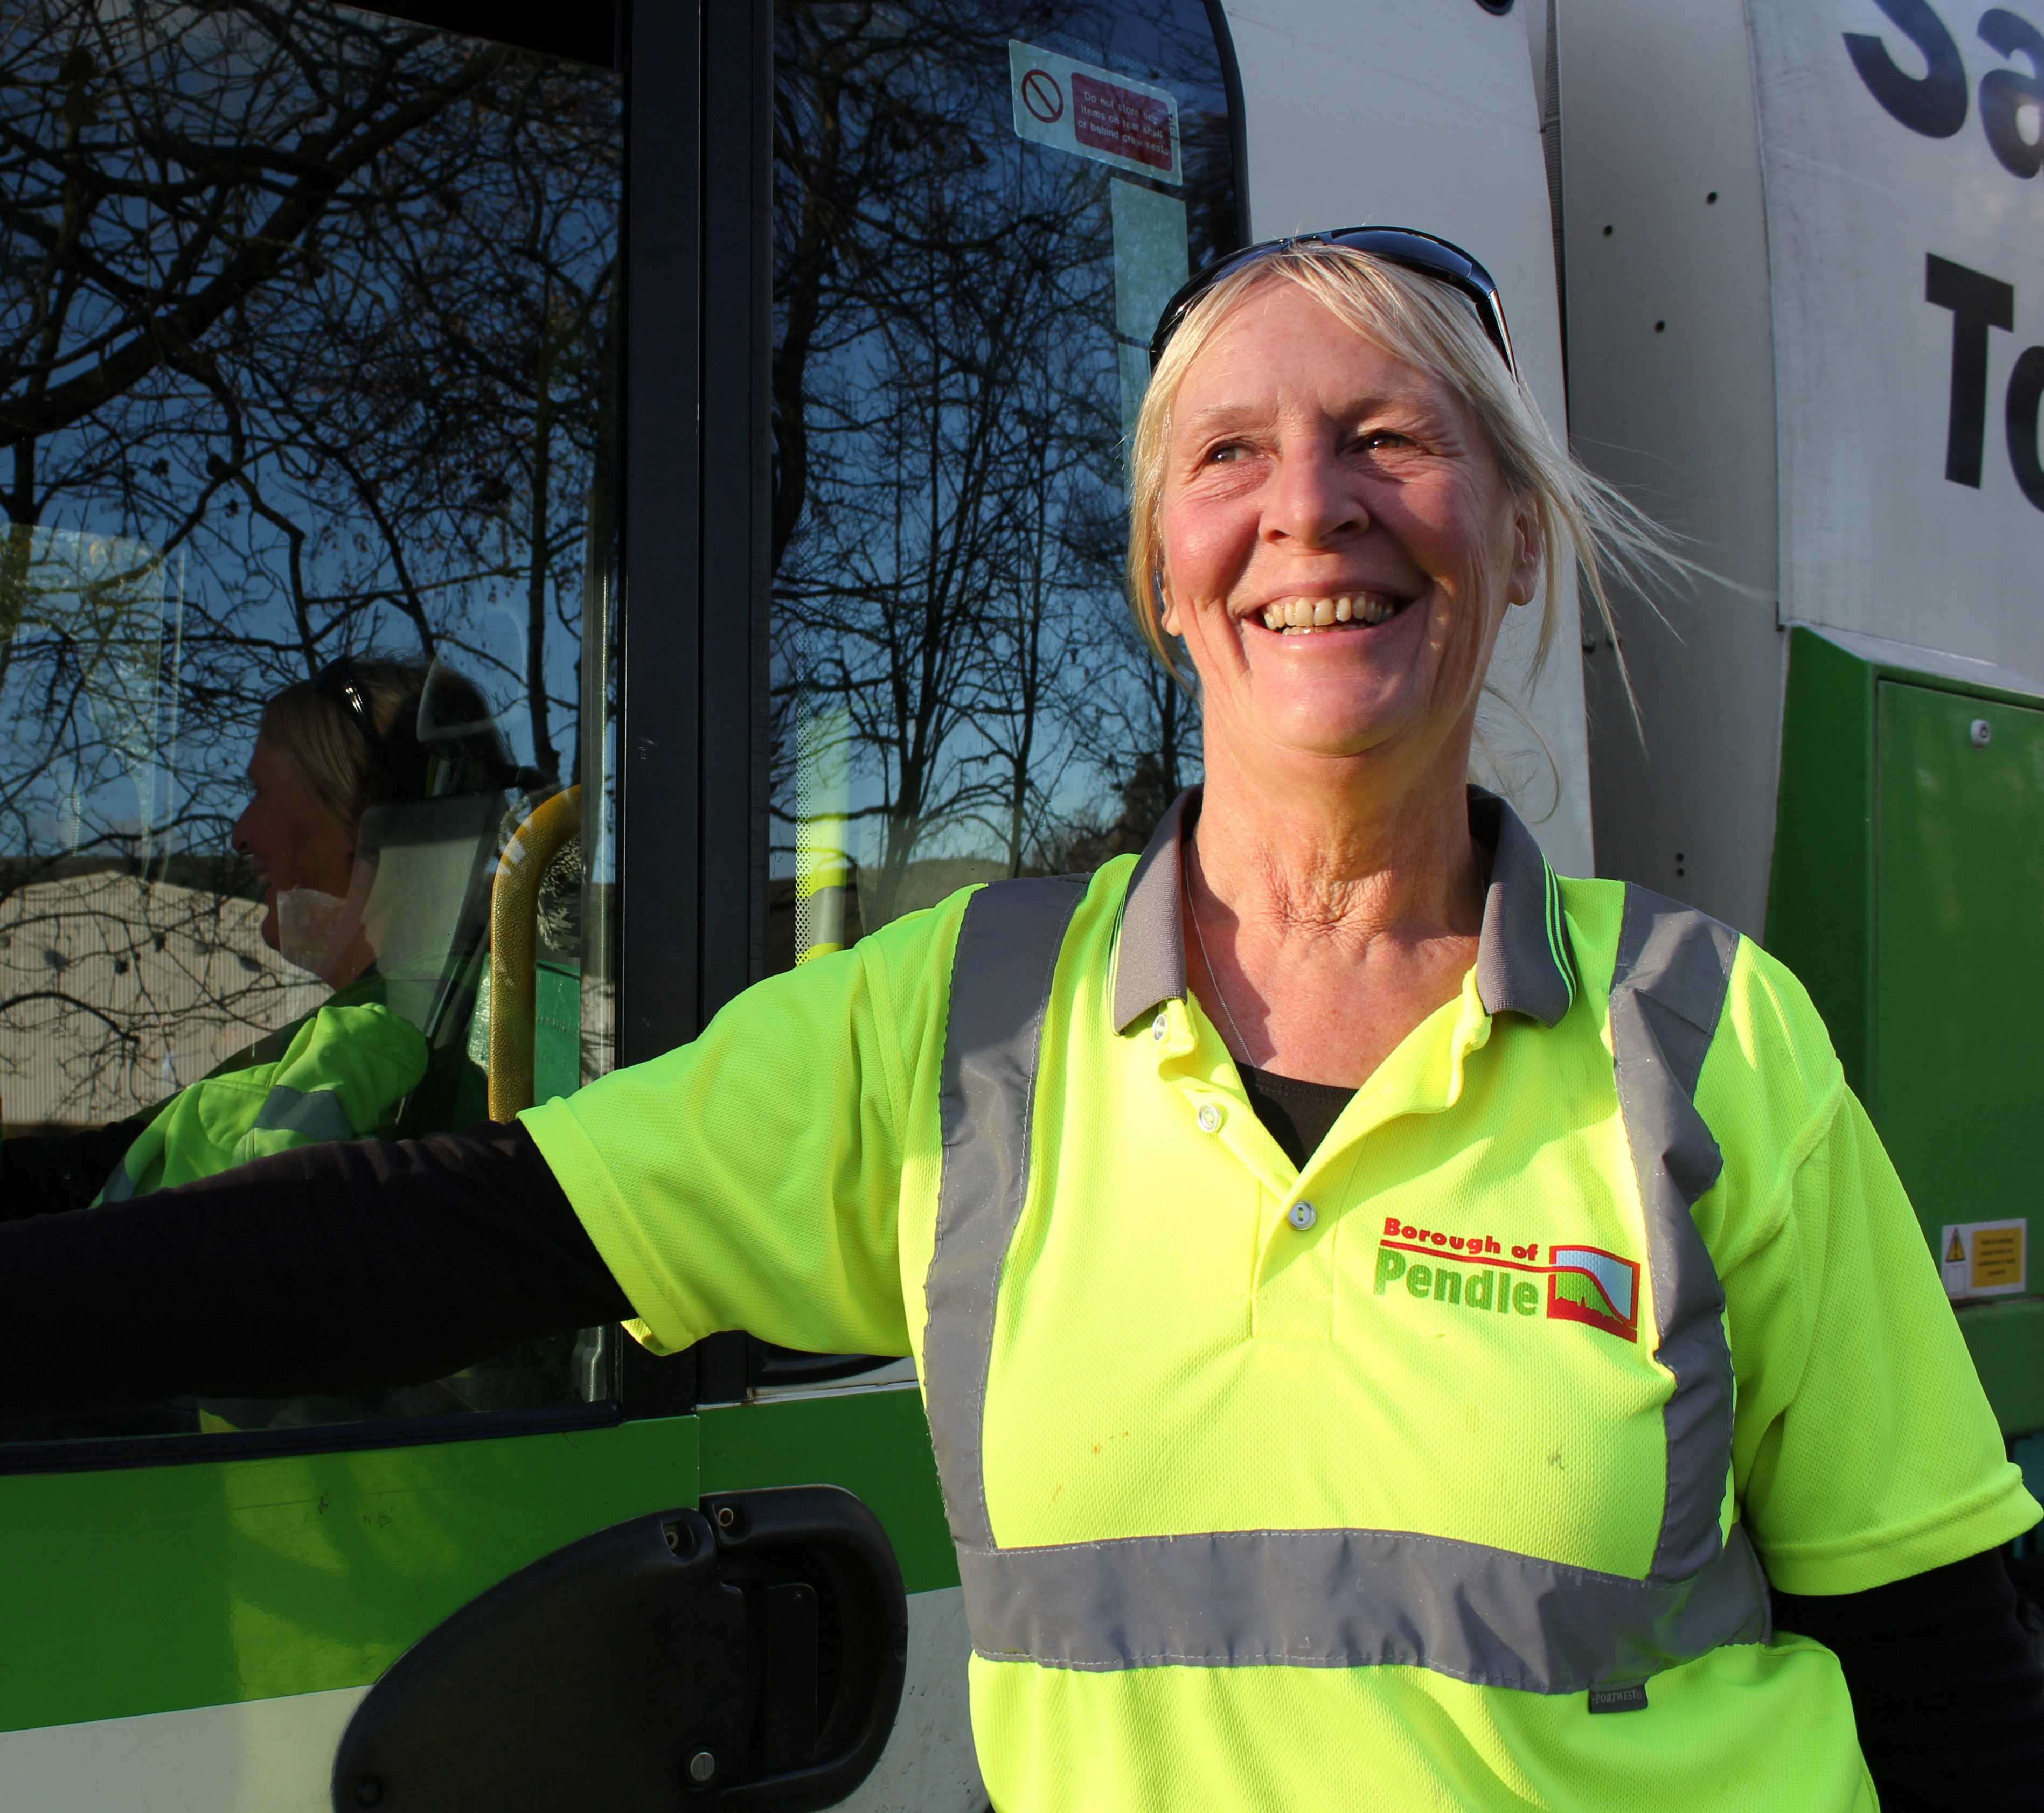 Debbie Green who works on Pendle Council's frontline collection team